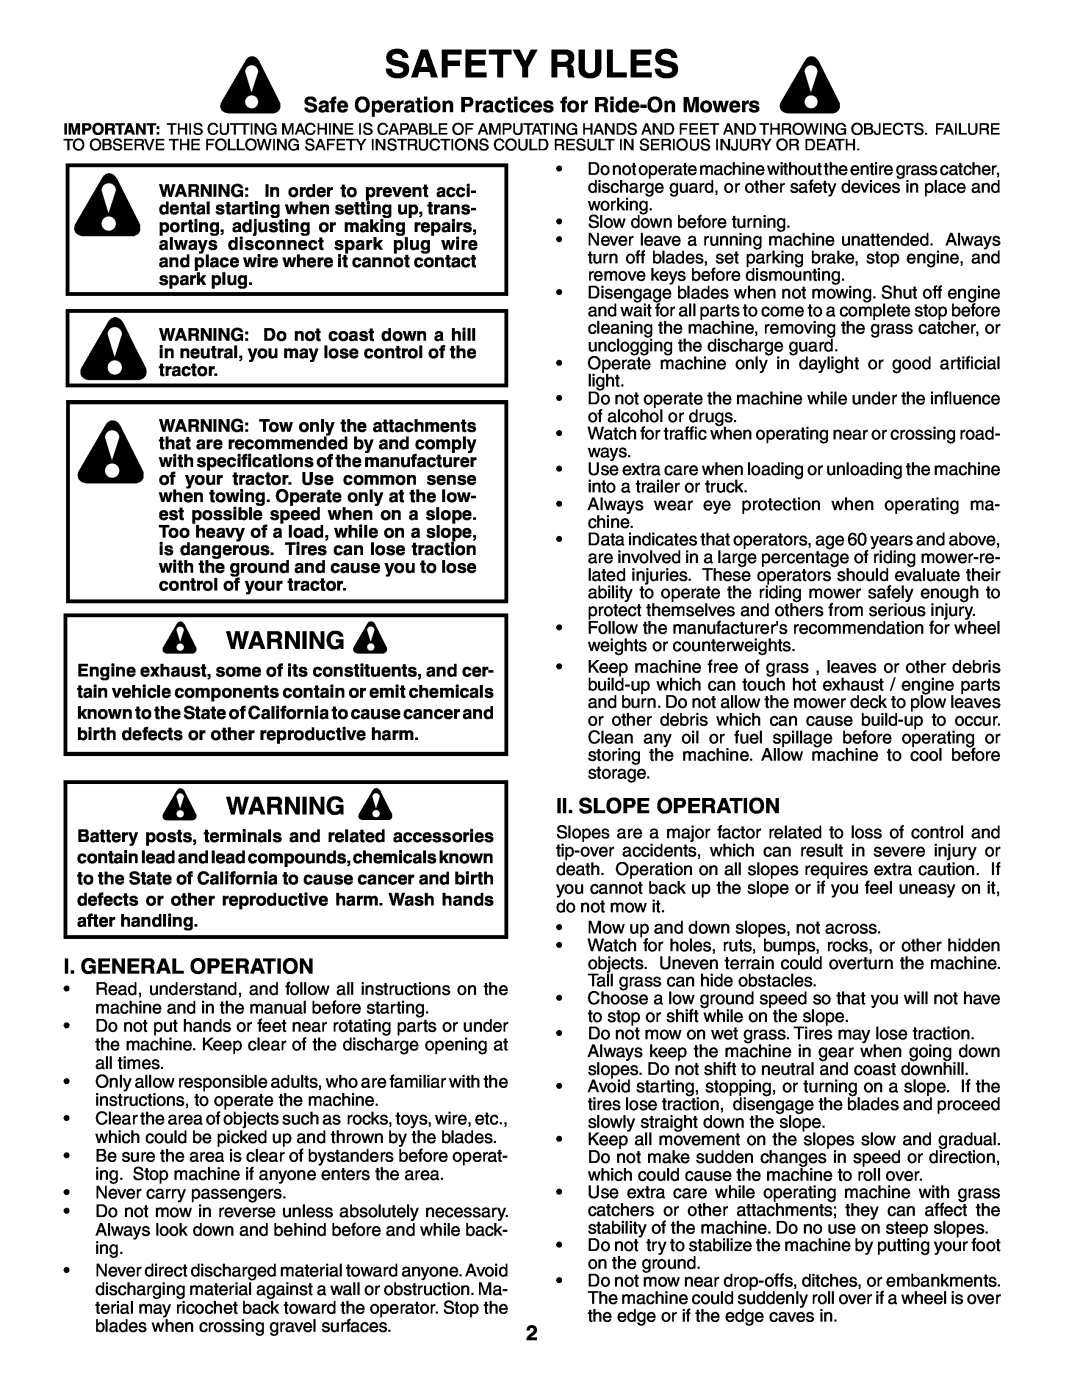 Poulan HDK19H42 manual Safety Rules, Safe Operation Practices for Ride-On Mowers, I. General Operation, Ii. Slope Operation 